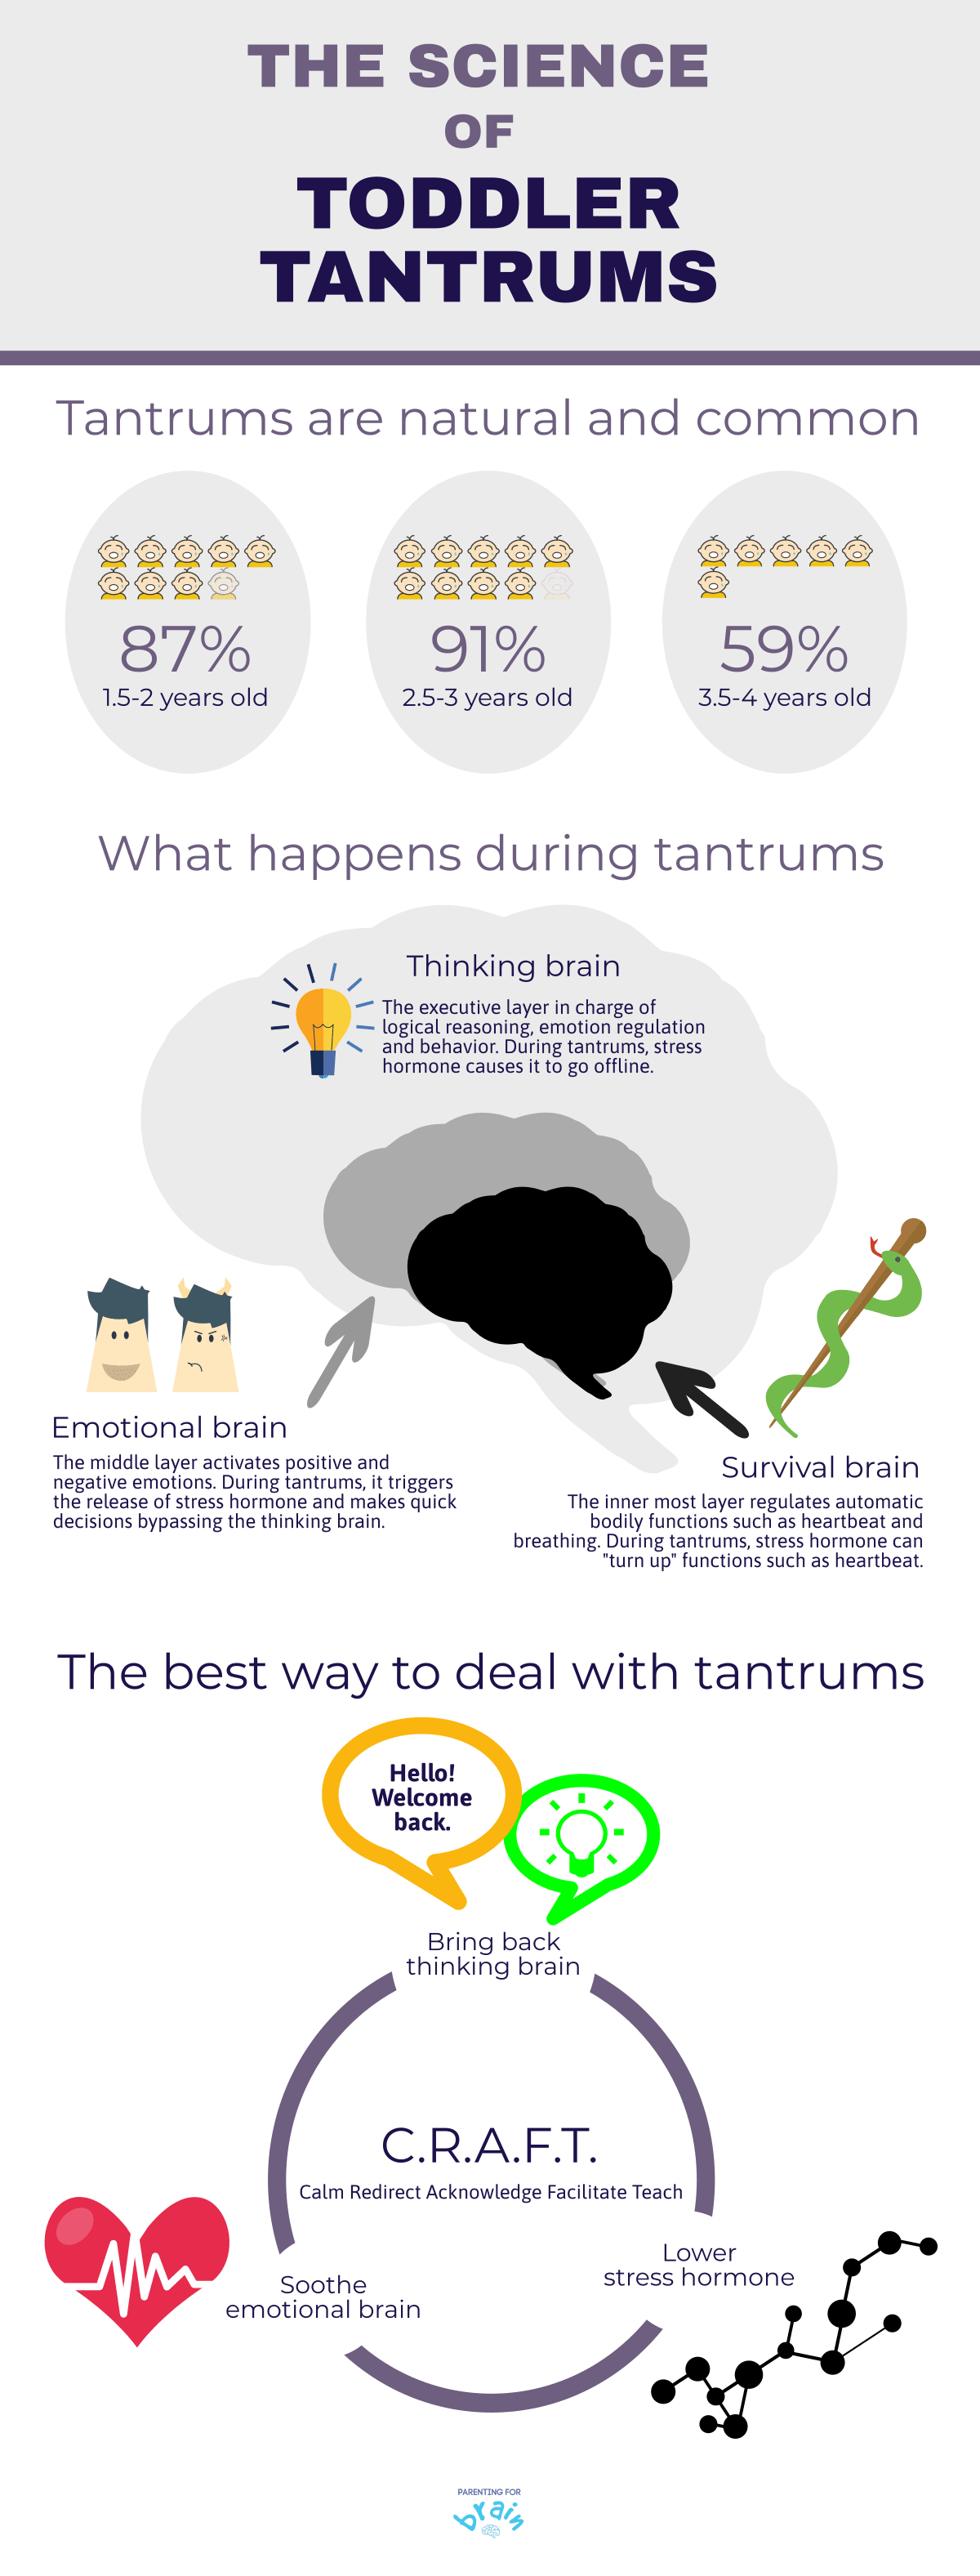 summary of the science of toddler tantrums, severe temper tantrums in 2 year-olds in this article